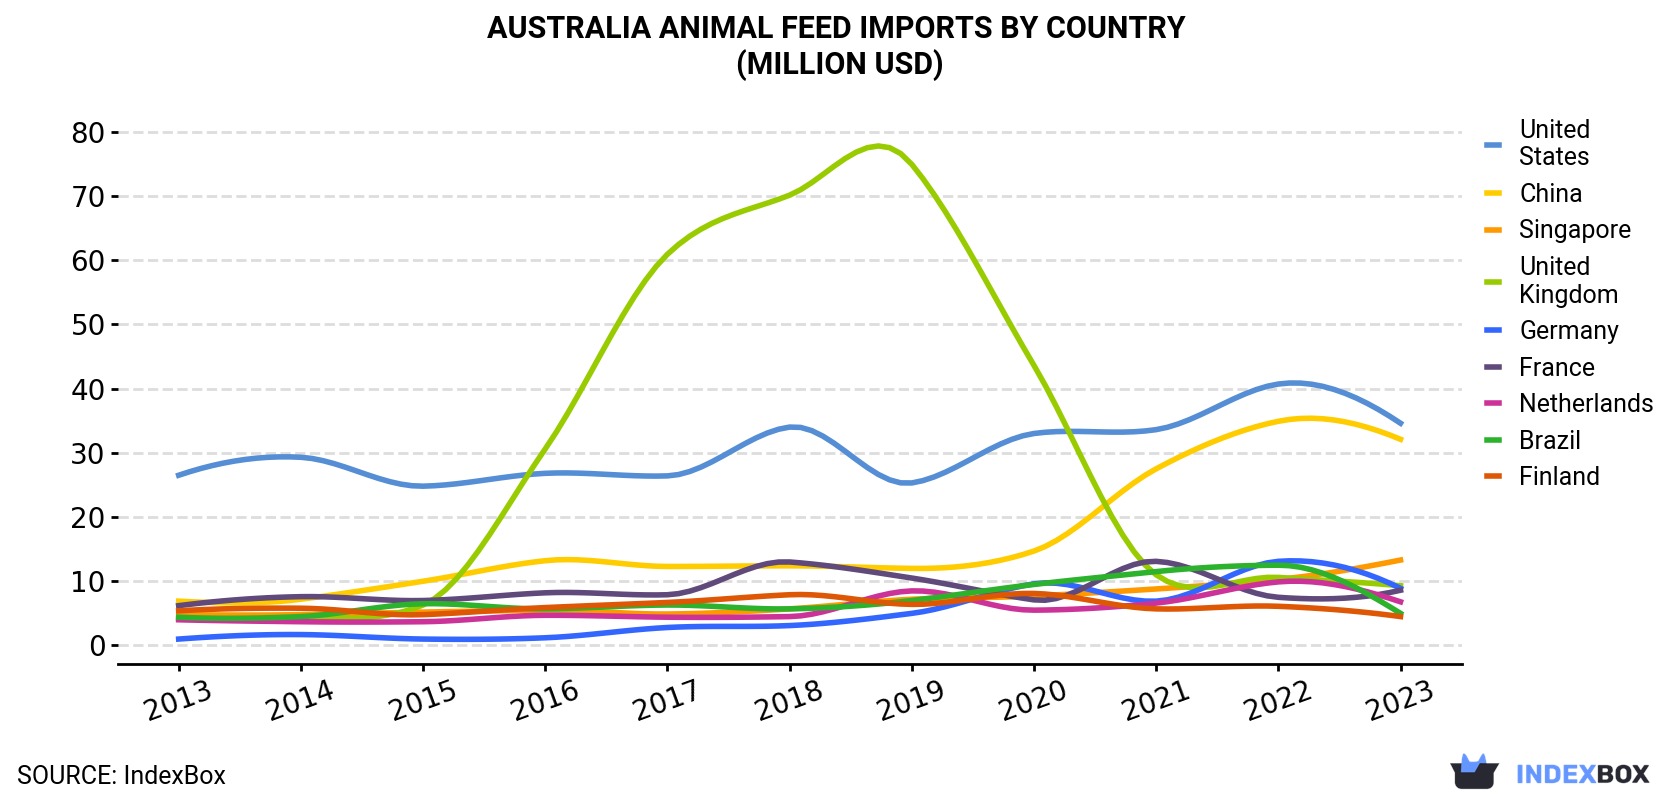 Australia Animal Feed Imports By Country (Million USD)